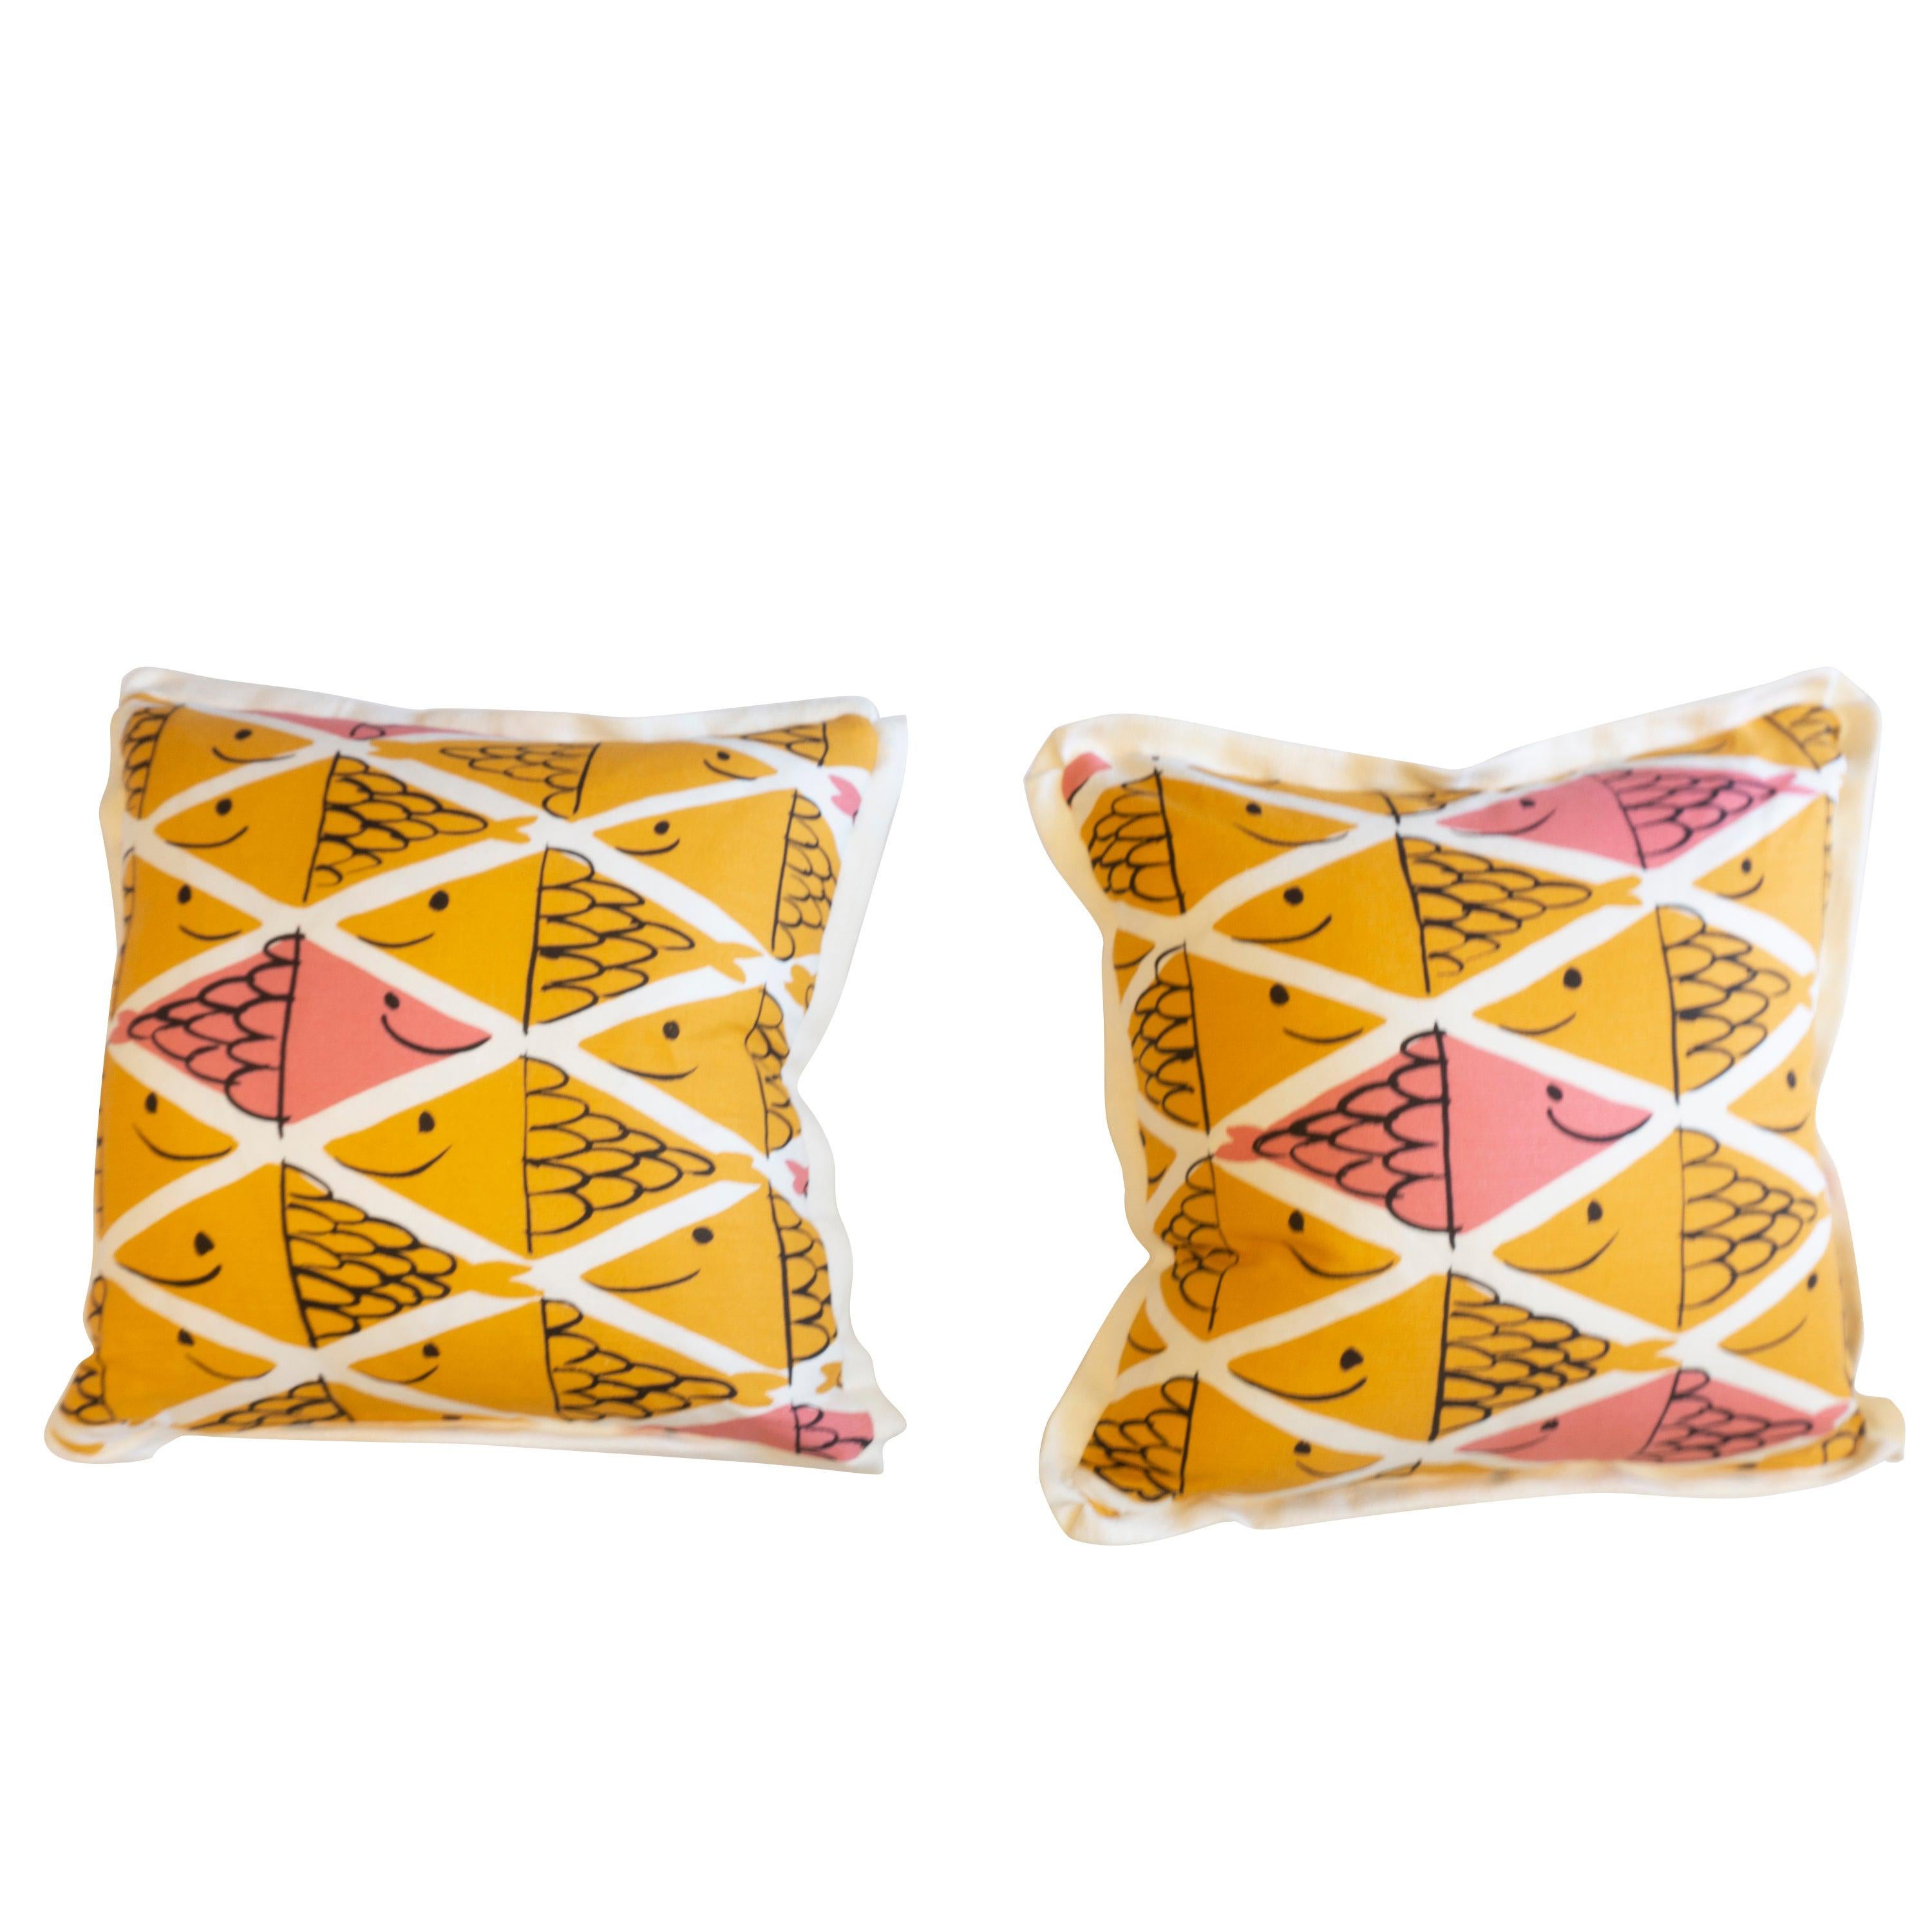 Throw Pillows with Smiling School of Fish Pattern